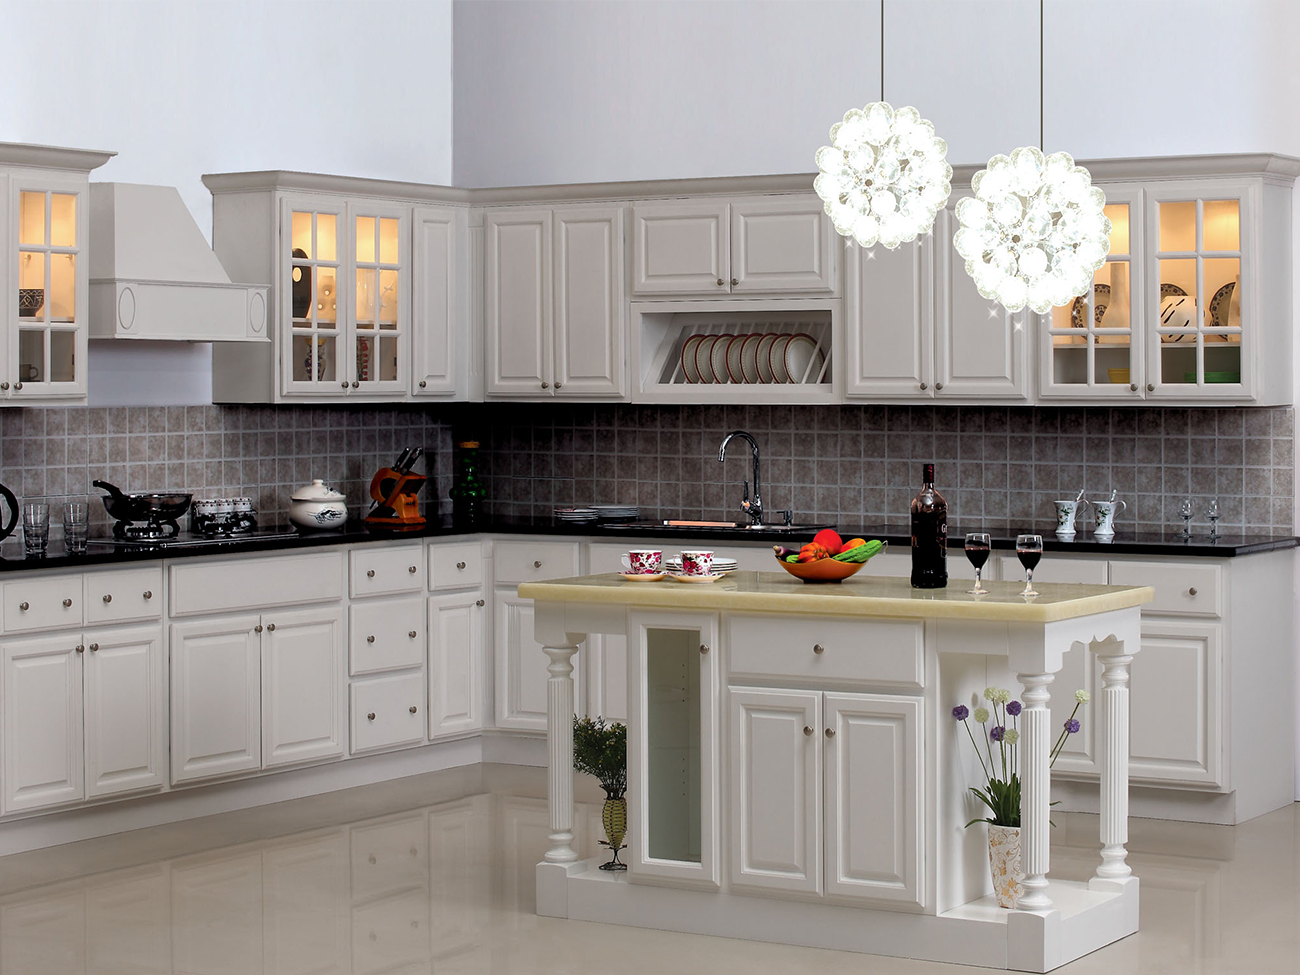 We Offer an Array of Cabinets in Our Gallery | Cabinet On Demand